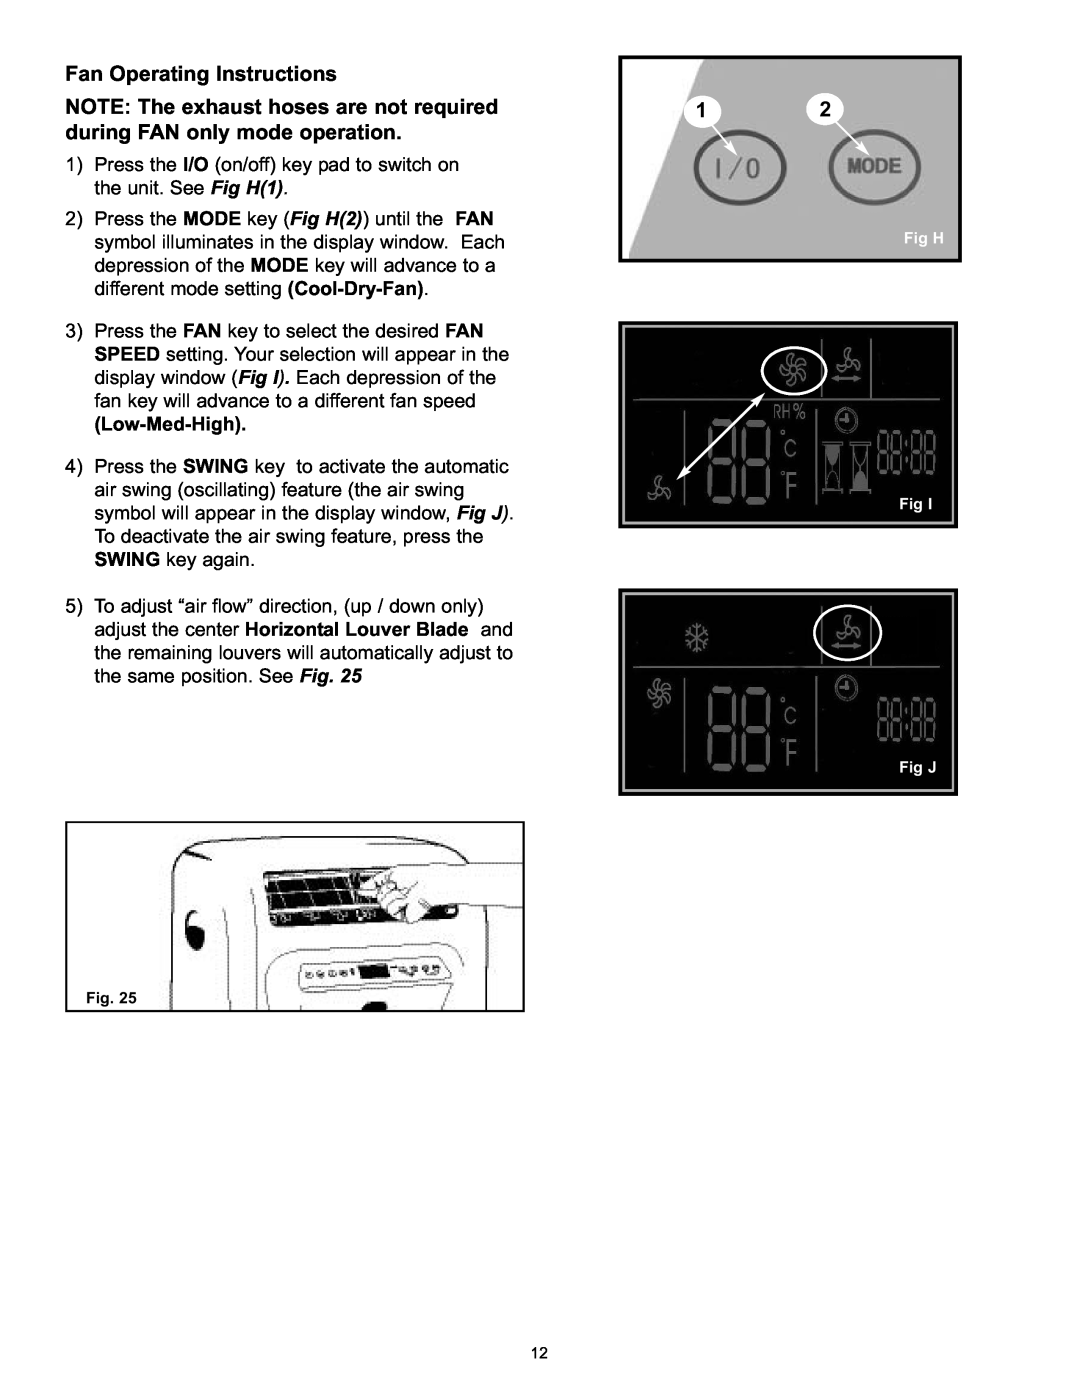 Danby DPAC120061 owner manual Fan Operating Instructions, Low-Med-High 